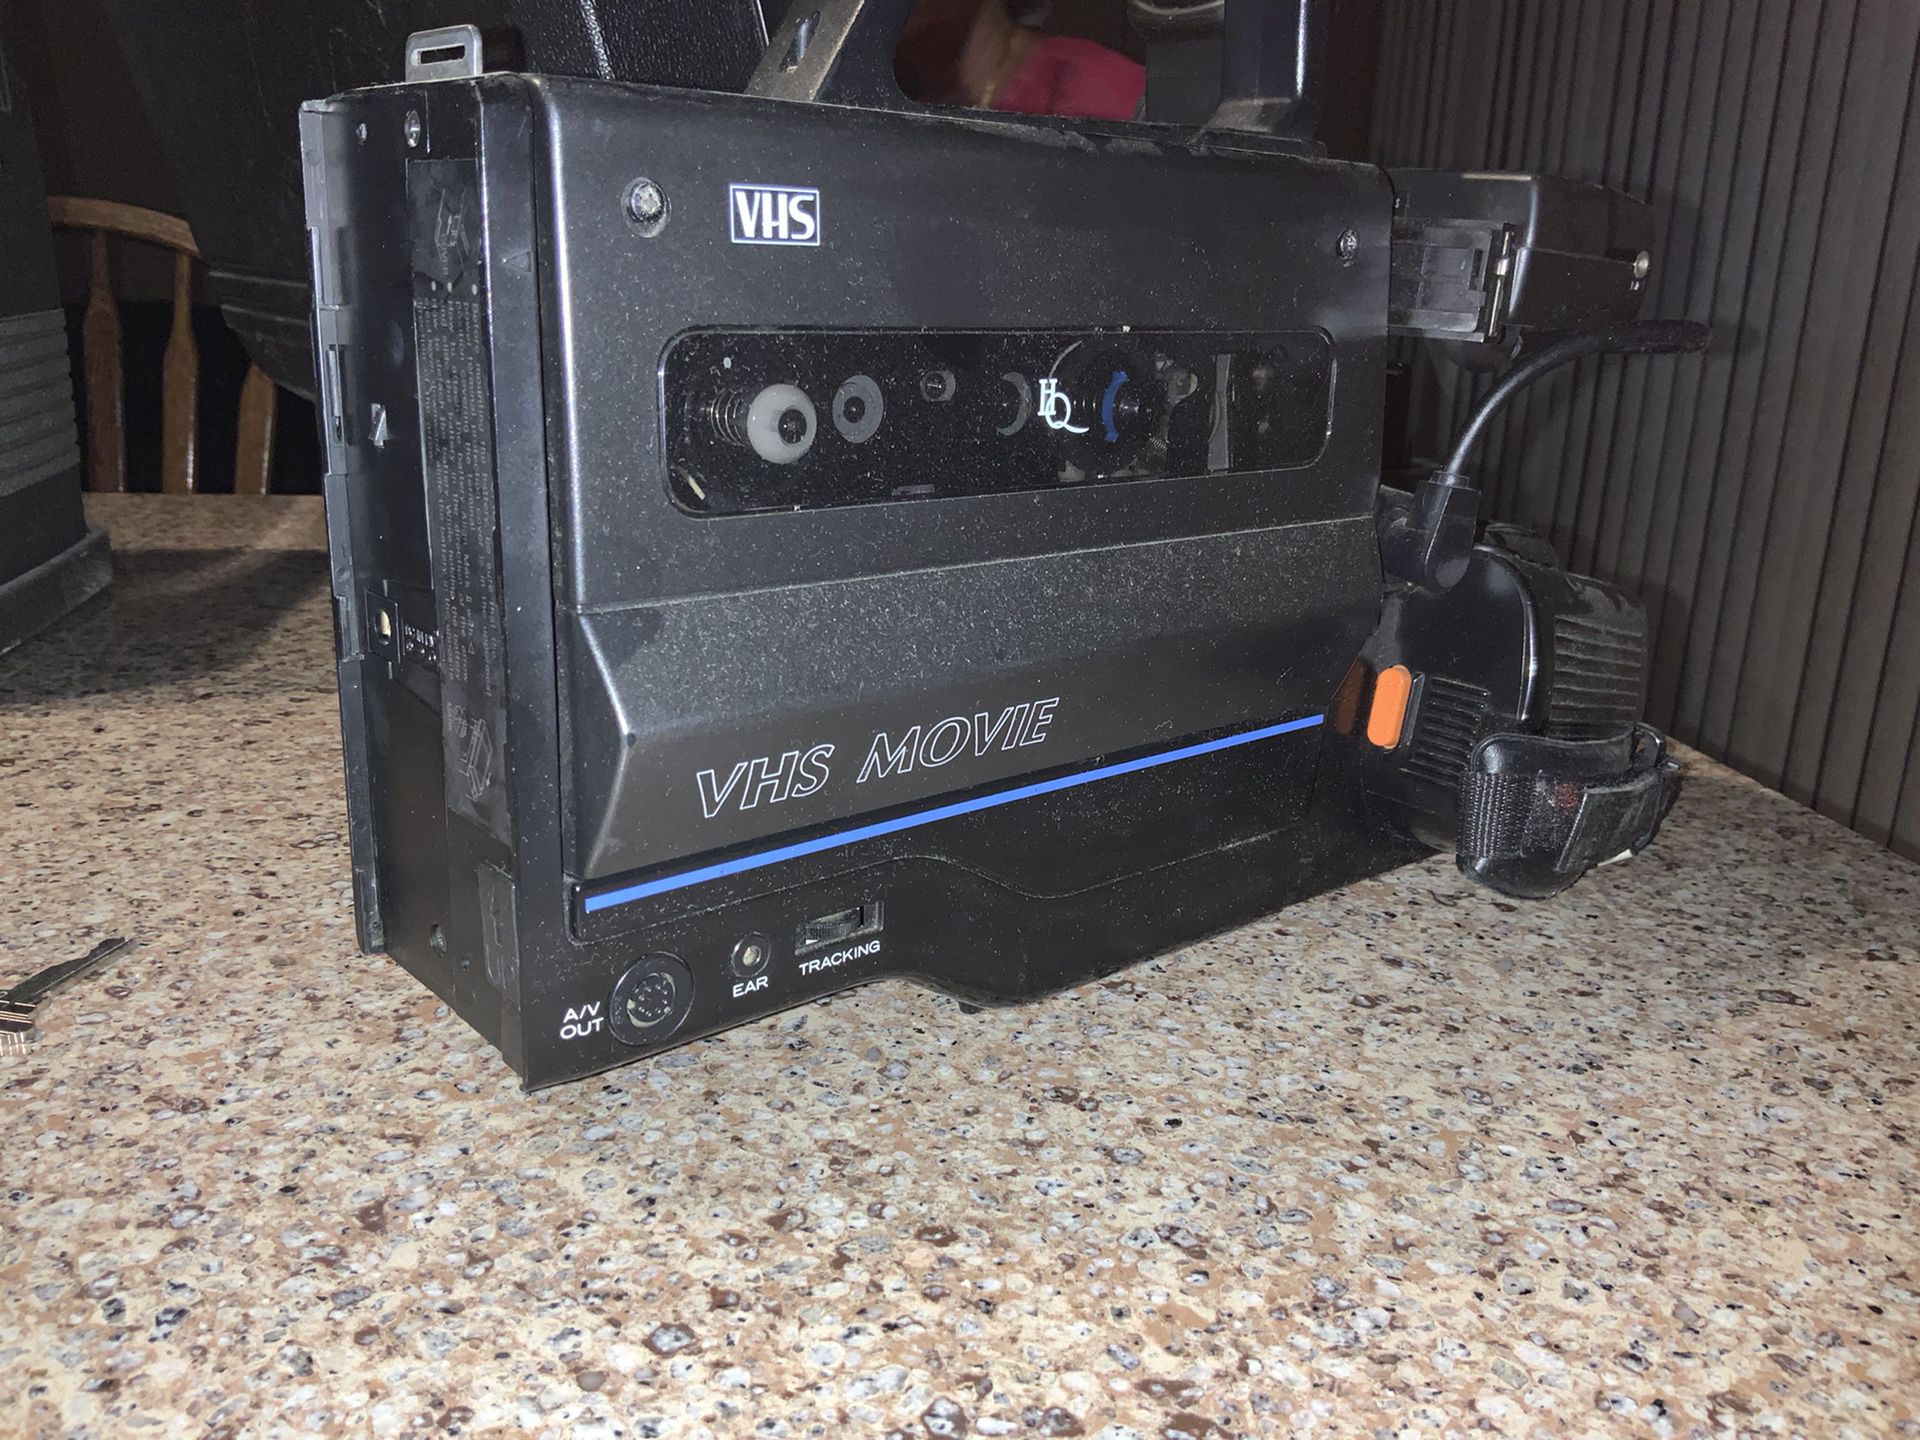 FULL SIZE VHS MOVIE SOLID STATE CCD CAMCORDER & RECORDER 6X ZOOM AF